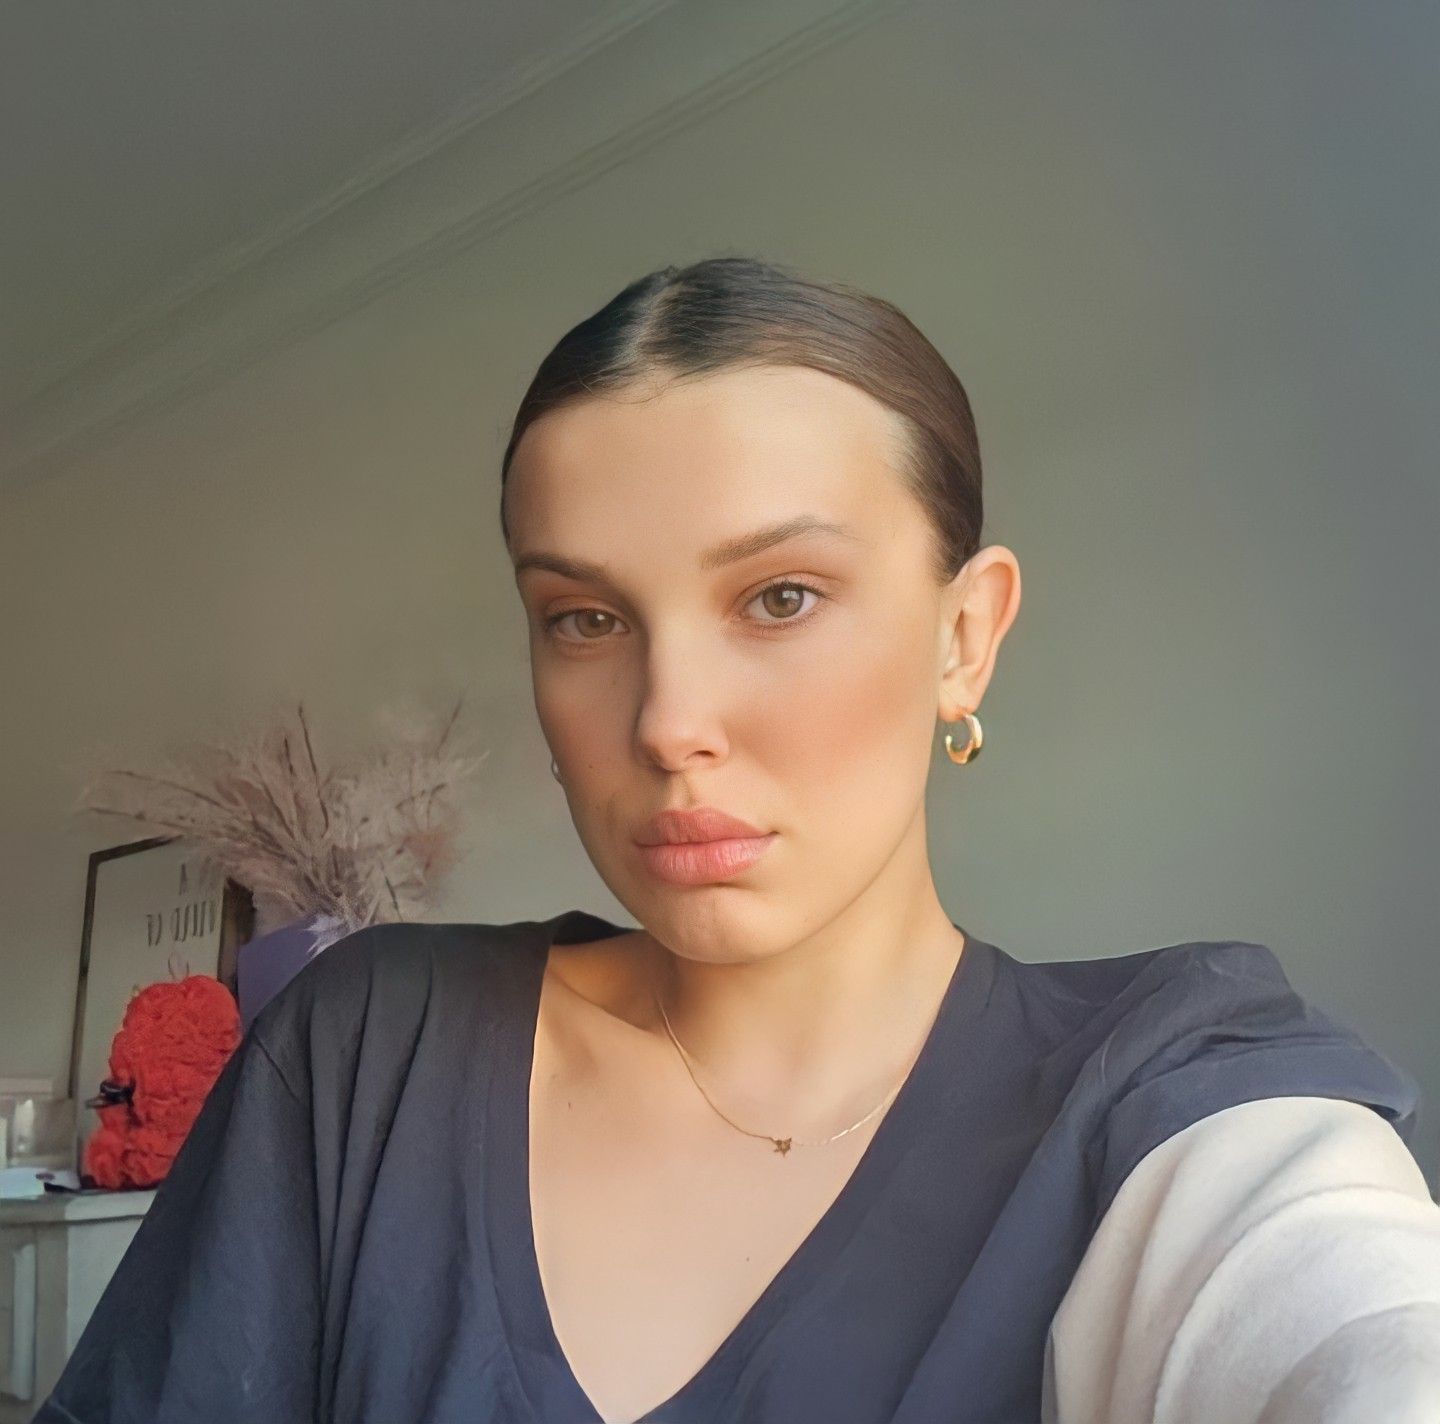 Watch Stranger Things Star Millie Bobby Brown Transform from Cute Chil   Vanity Fair